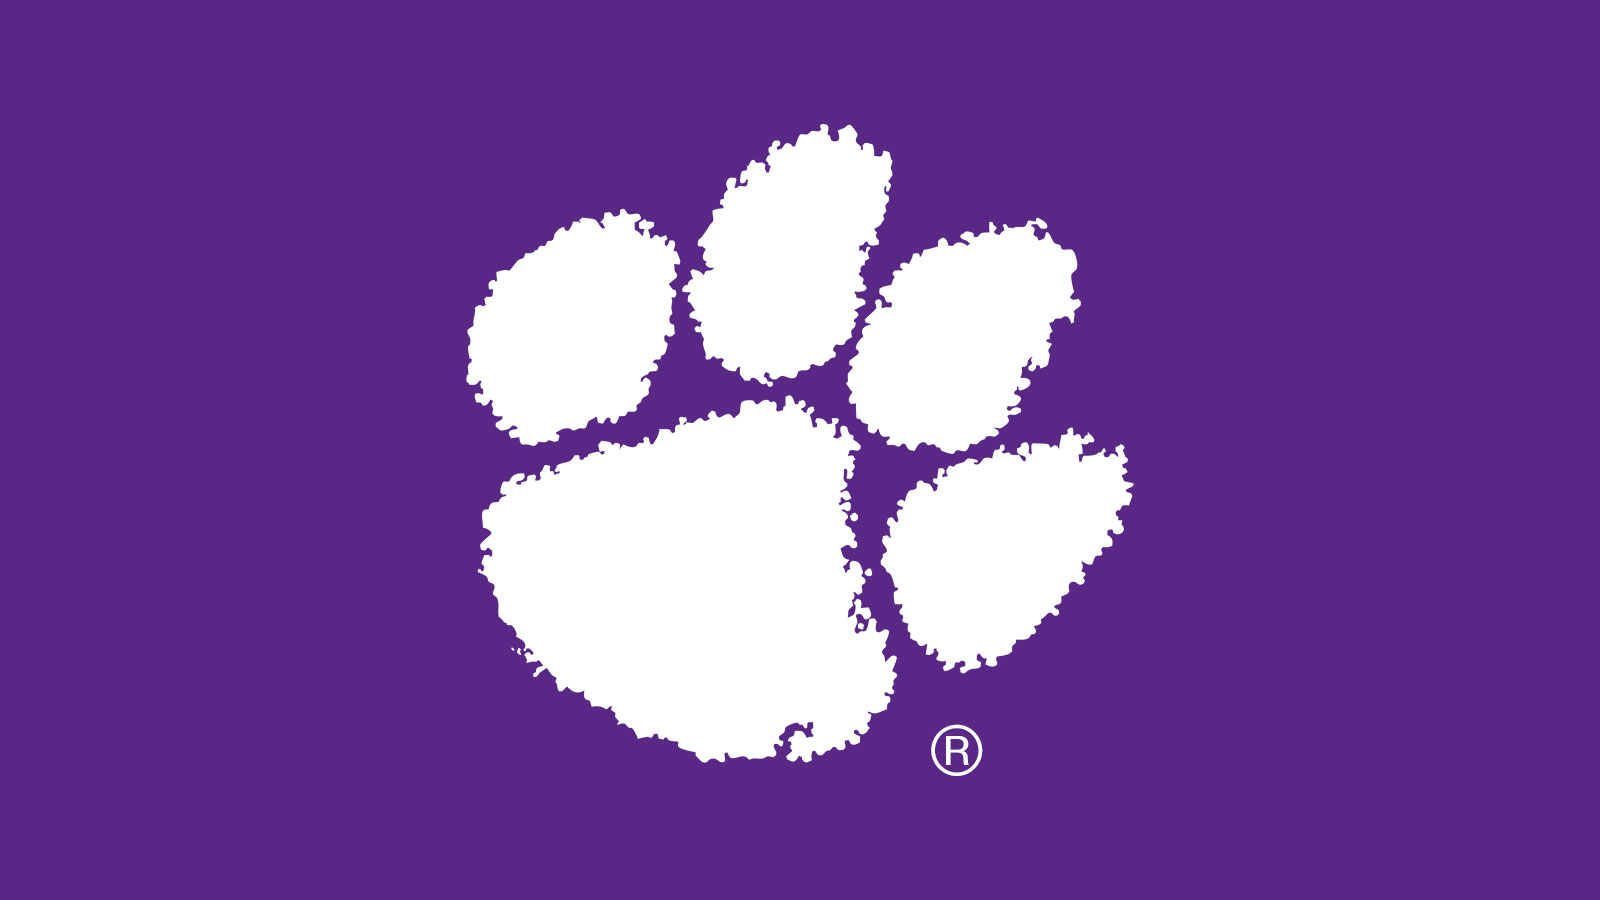 Clemson research suggests a practical use for regret, hindsight